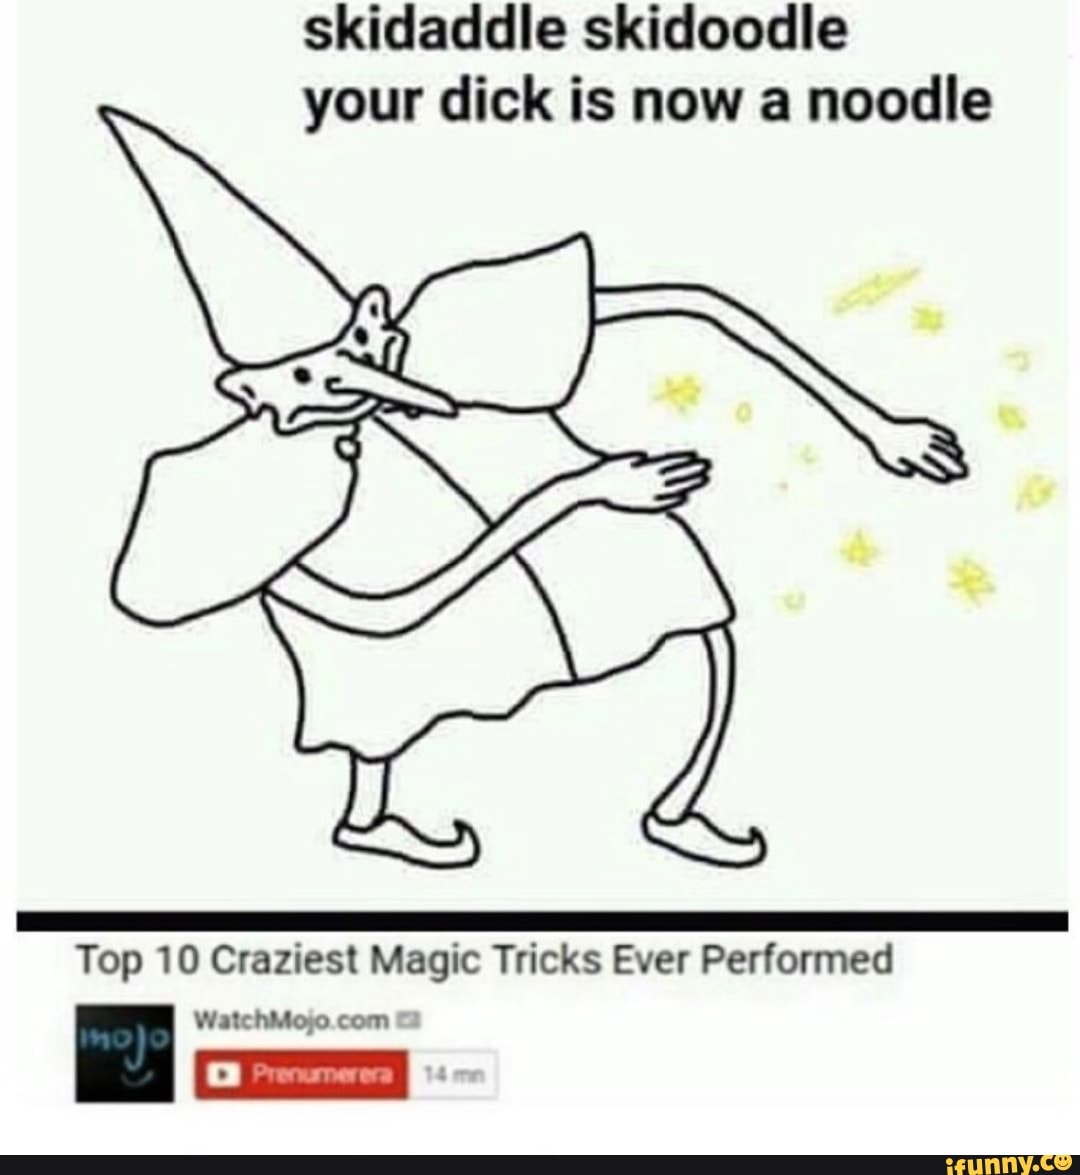 Tricks with your dick